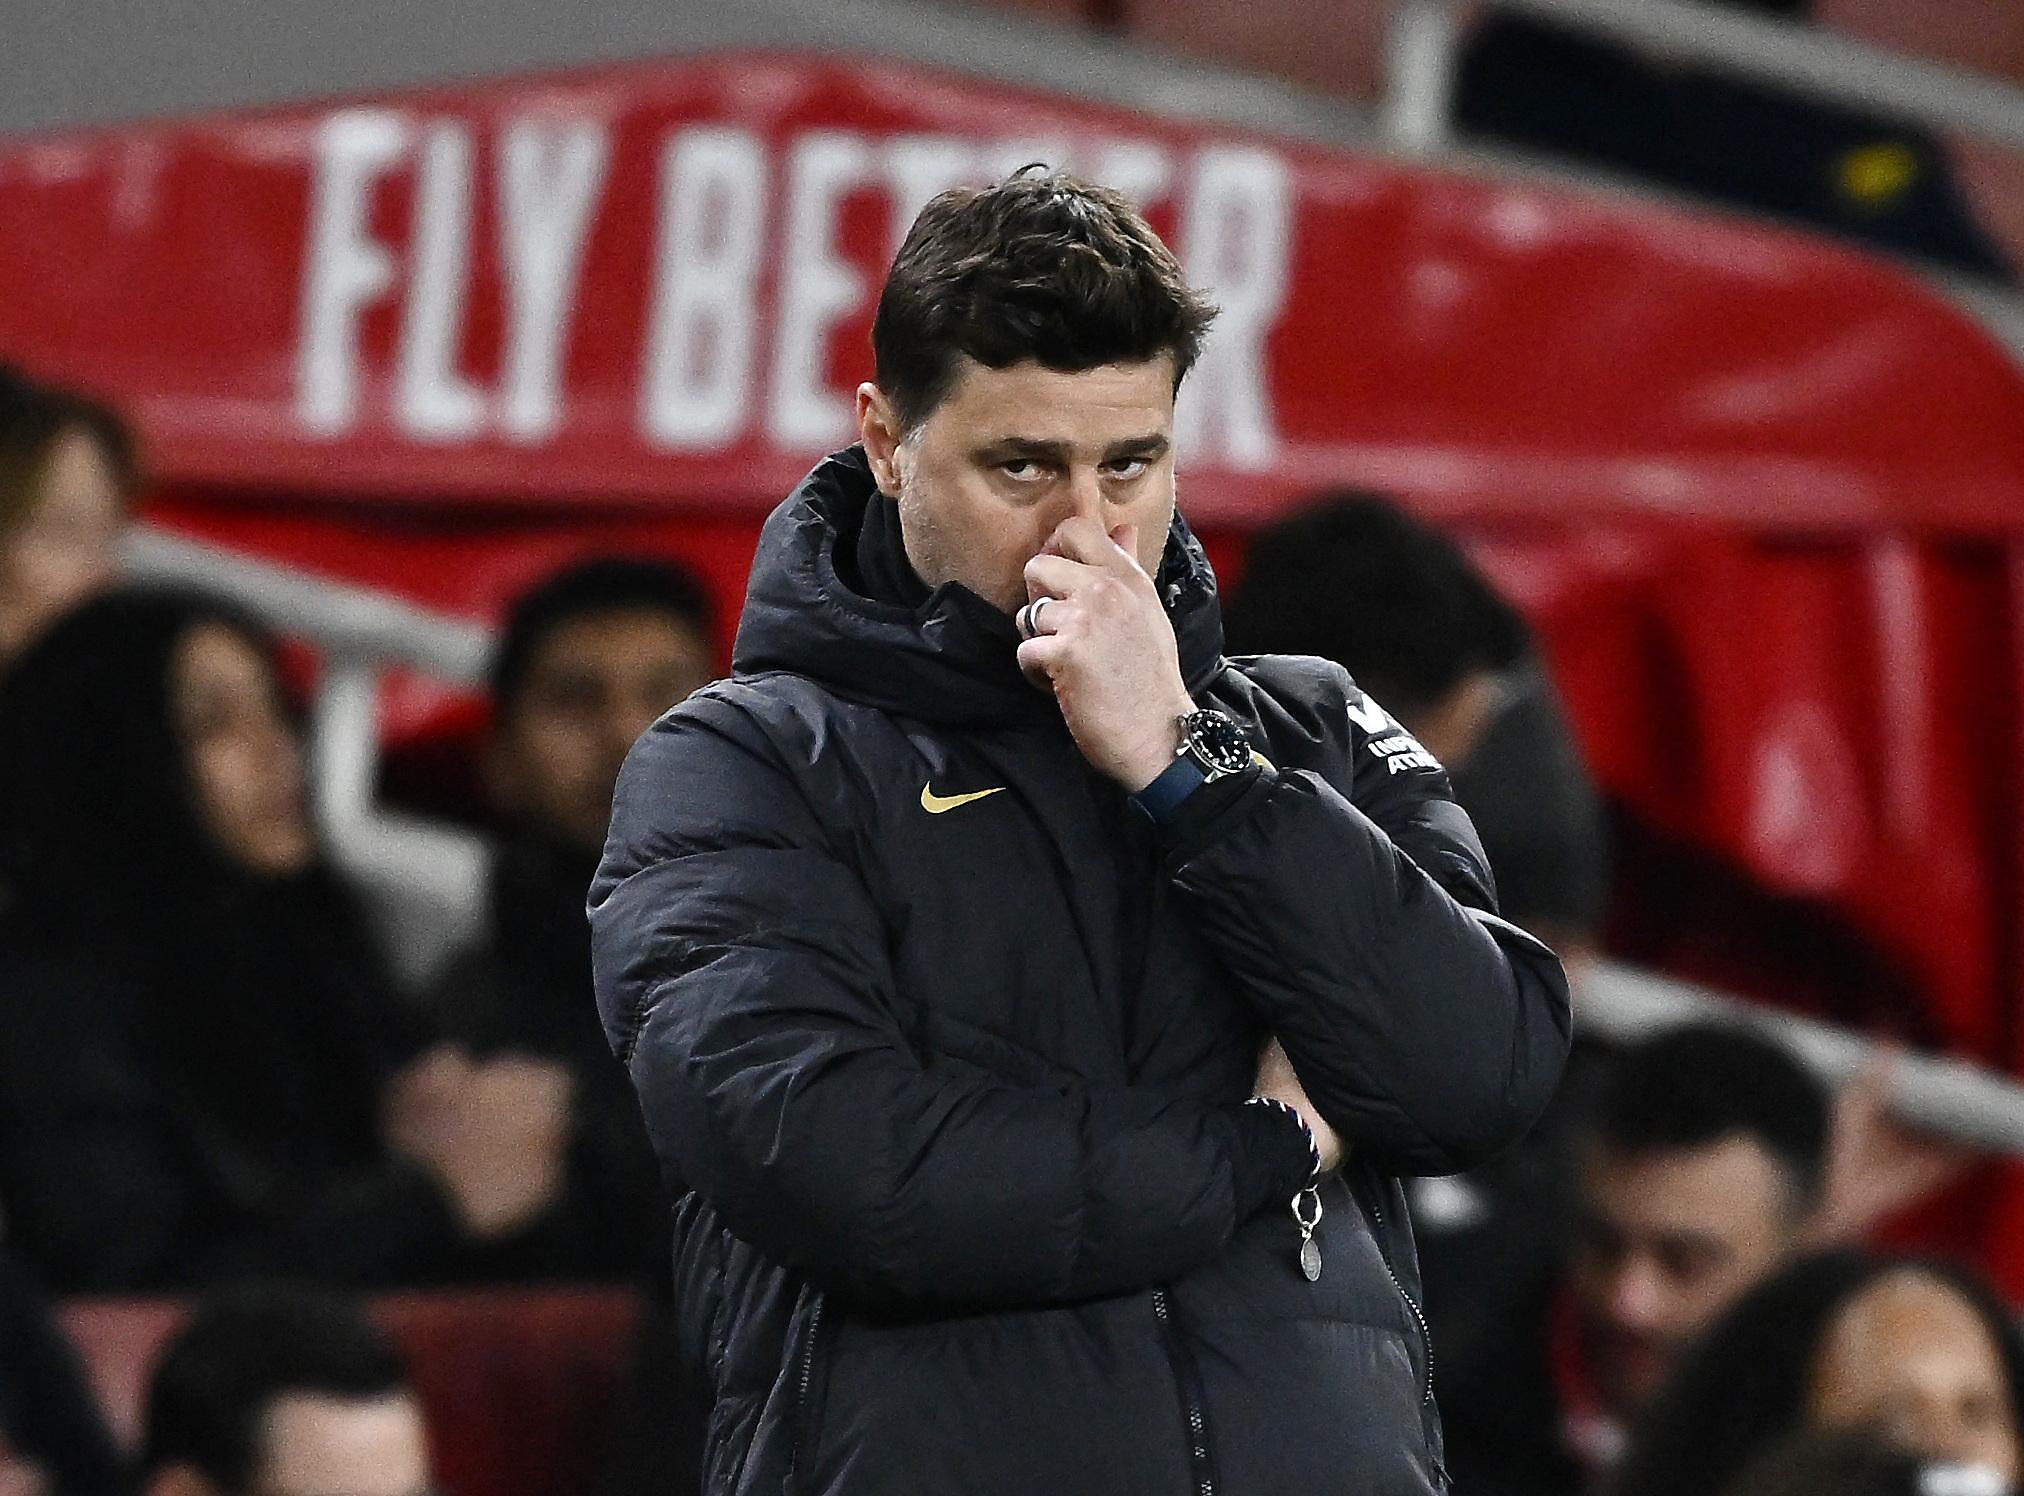 Premier League: “The team has given up”, notes Mauricio Pochettino after Arsenal’s card